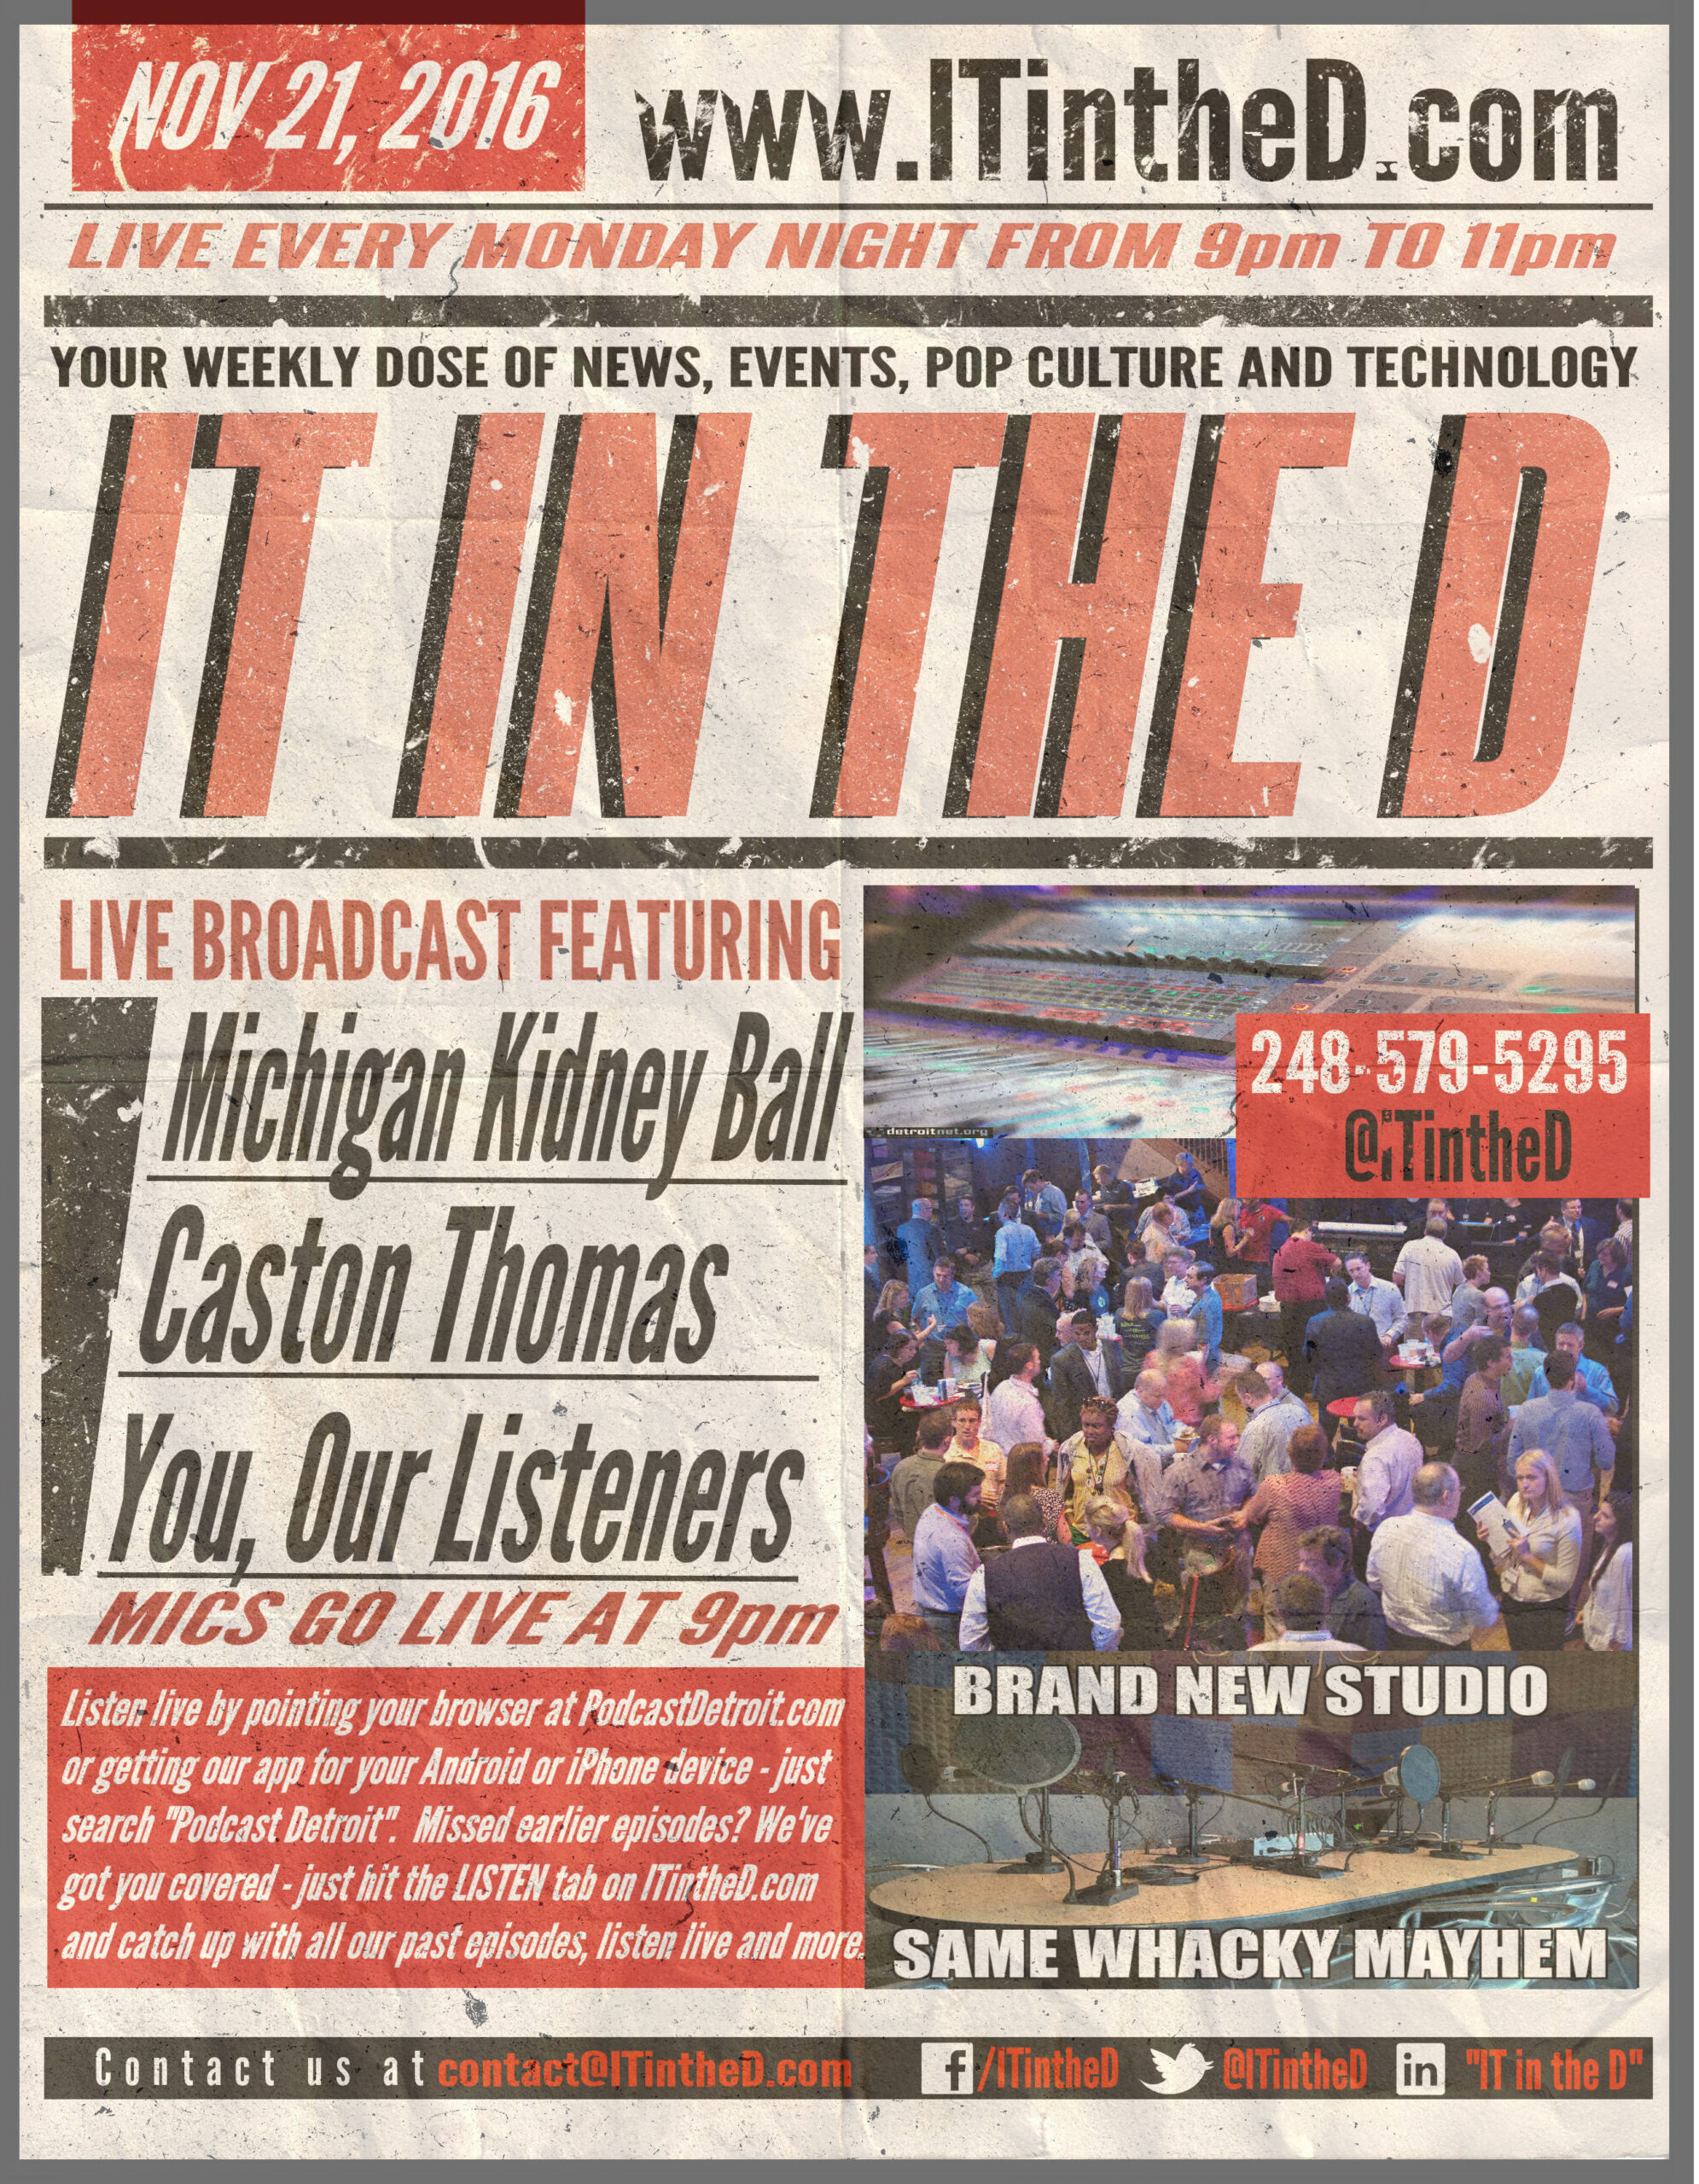 Michigan Kidney Ball, Caston Thomas In-Studio Tonight, Event Updates and More for 11/21/2016